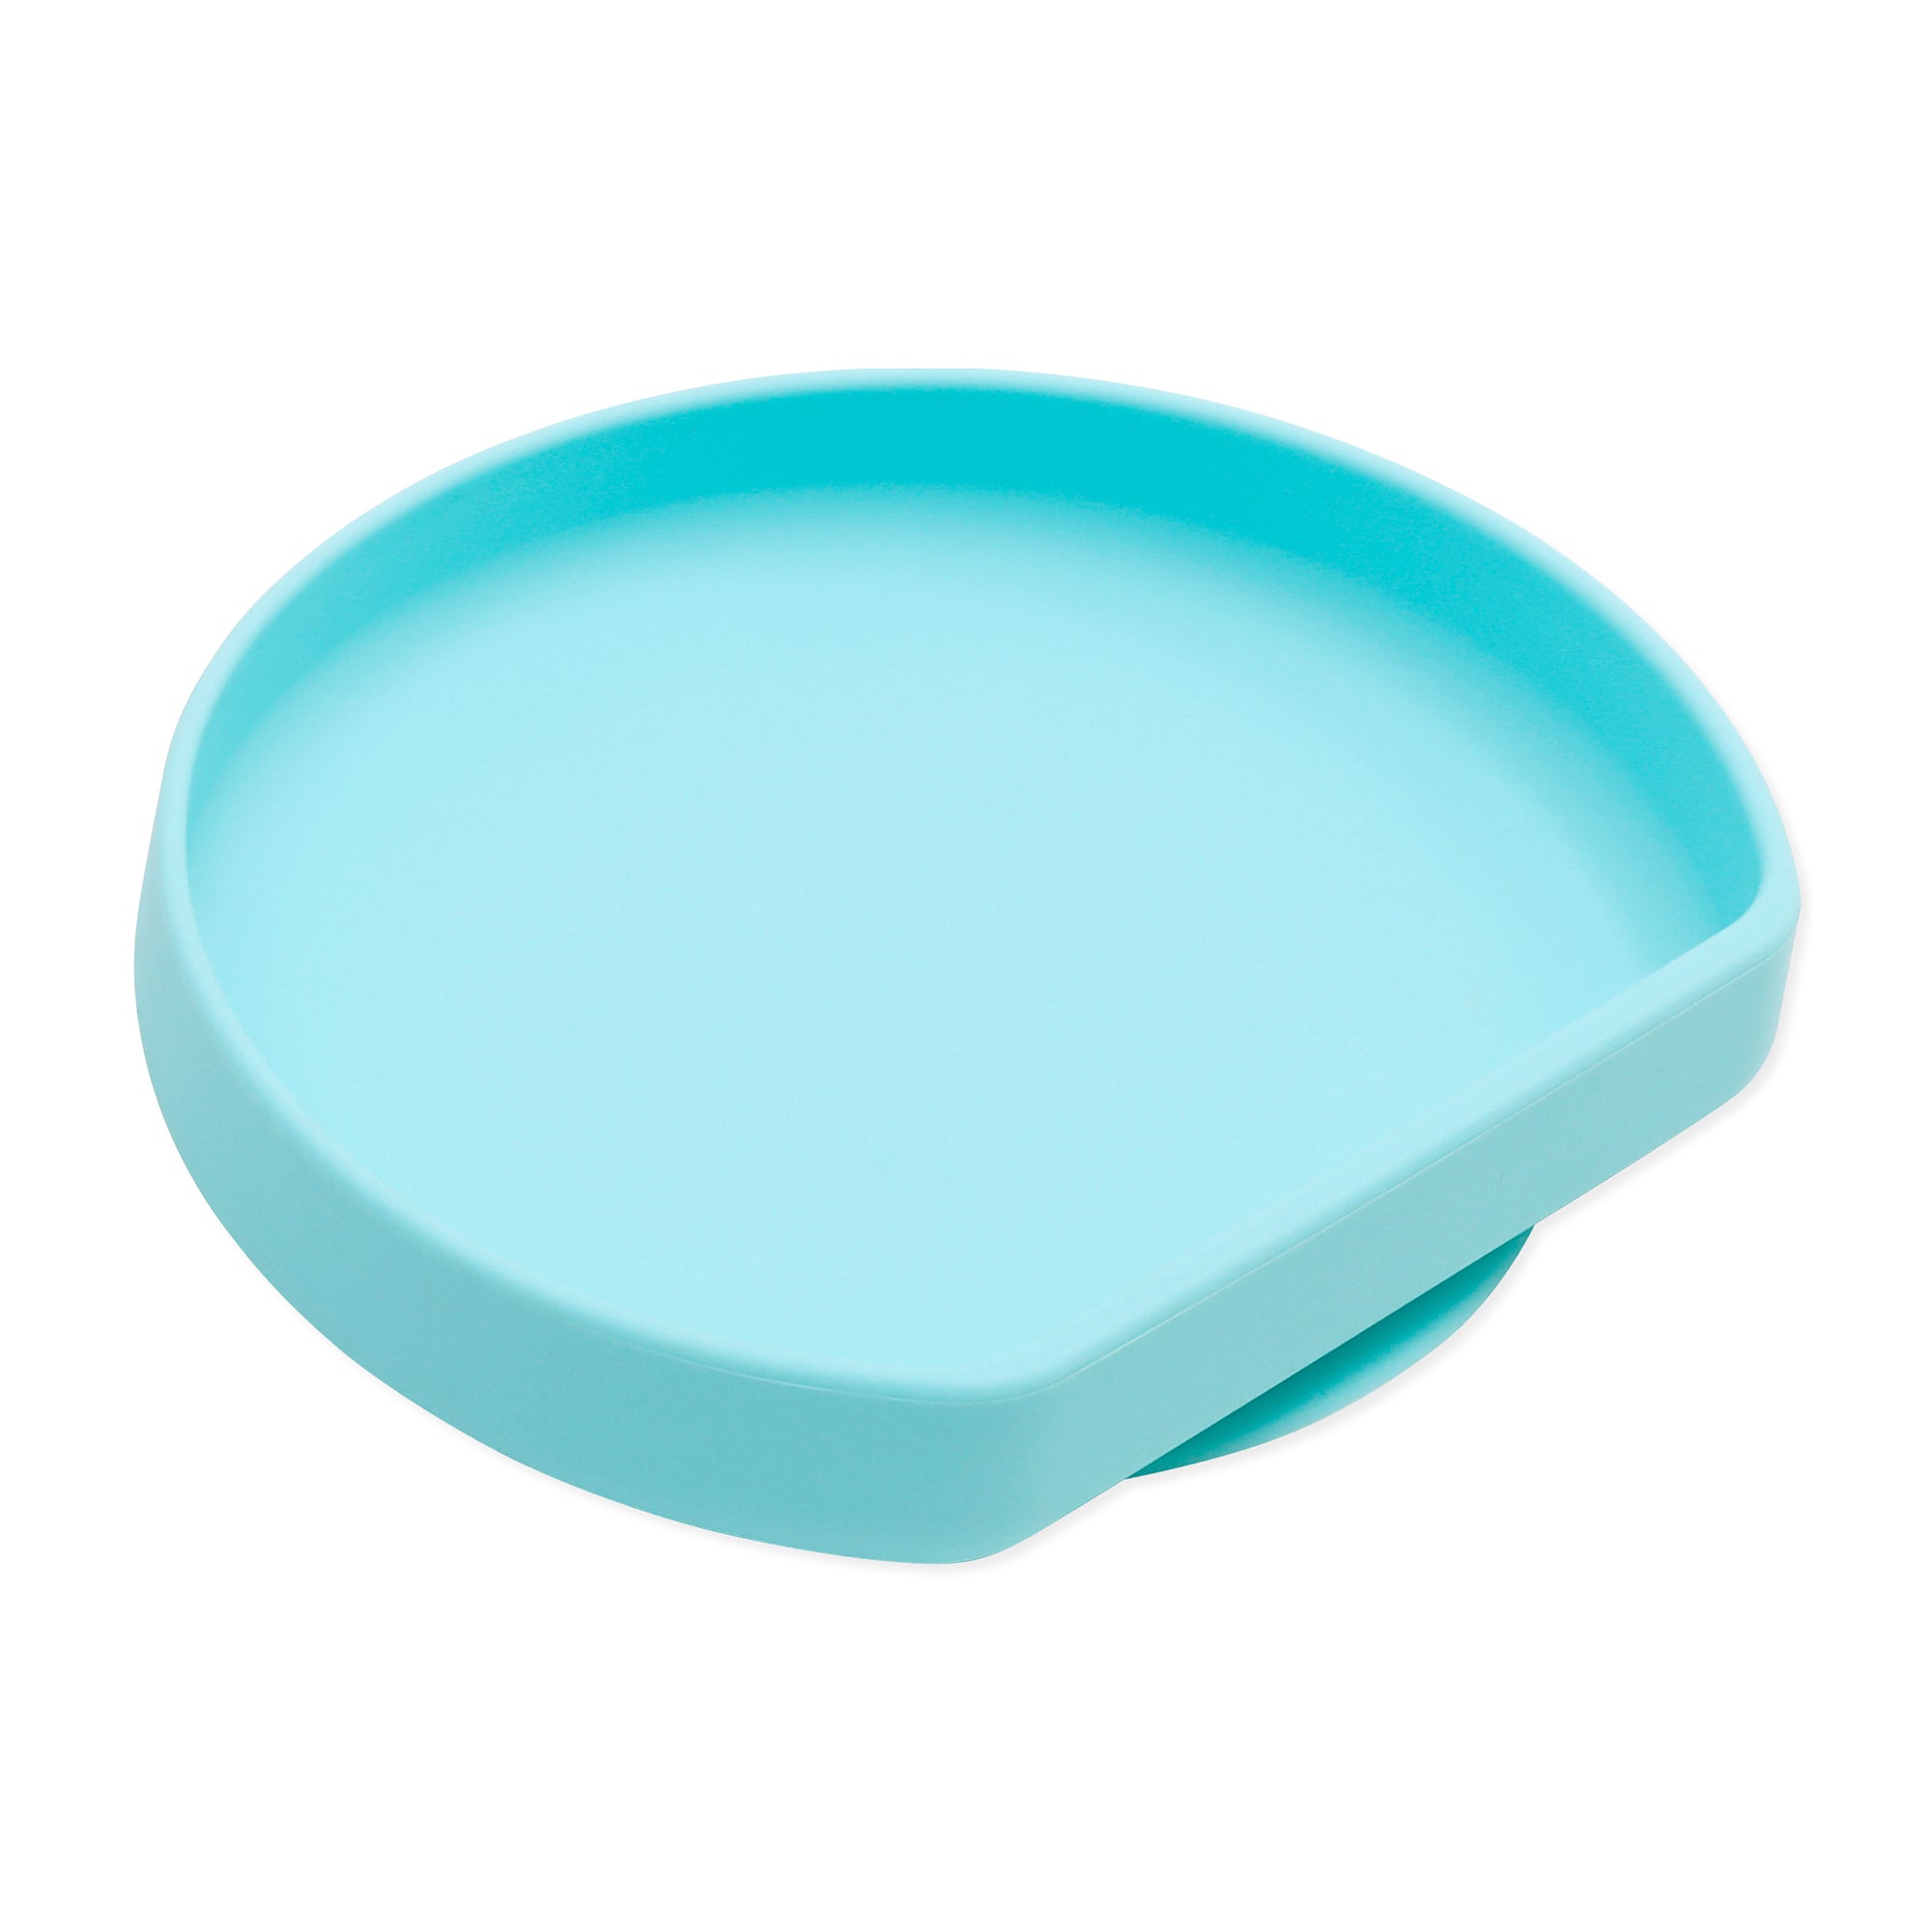 Non Toxic Silicone Suction Plate For Experienced Eaters